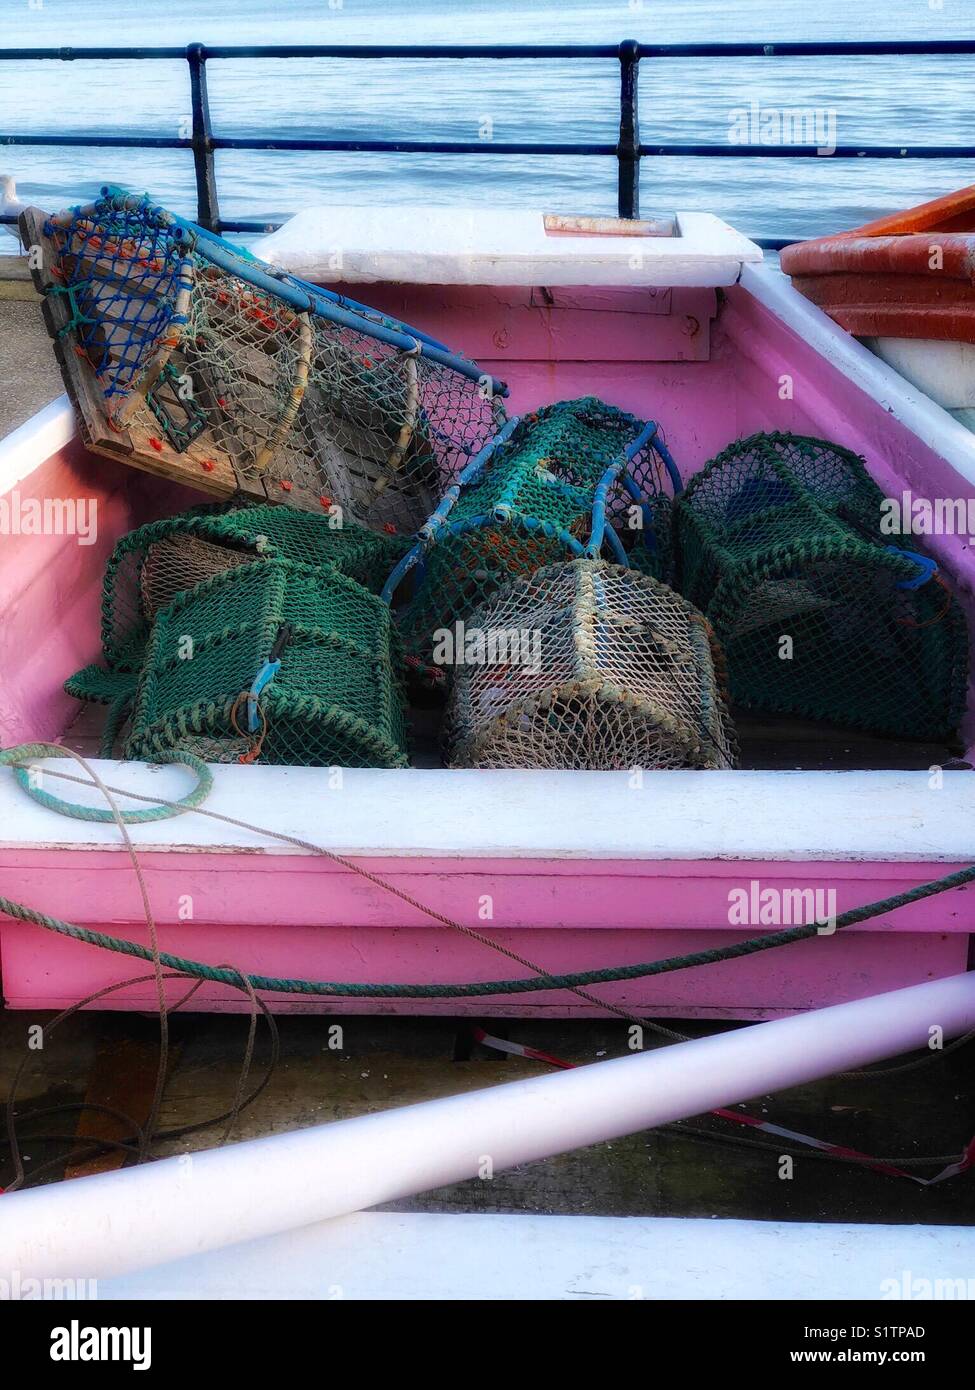 6 lobster pots in a pink fishing boat Stock Photo - Alamy